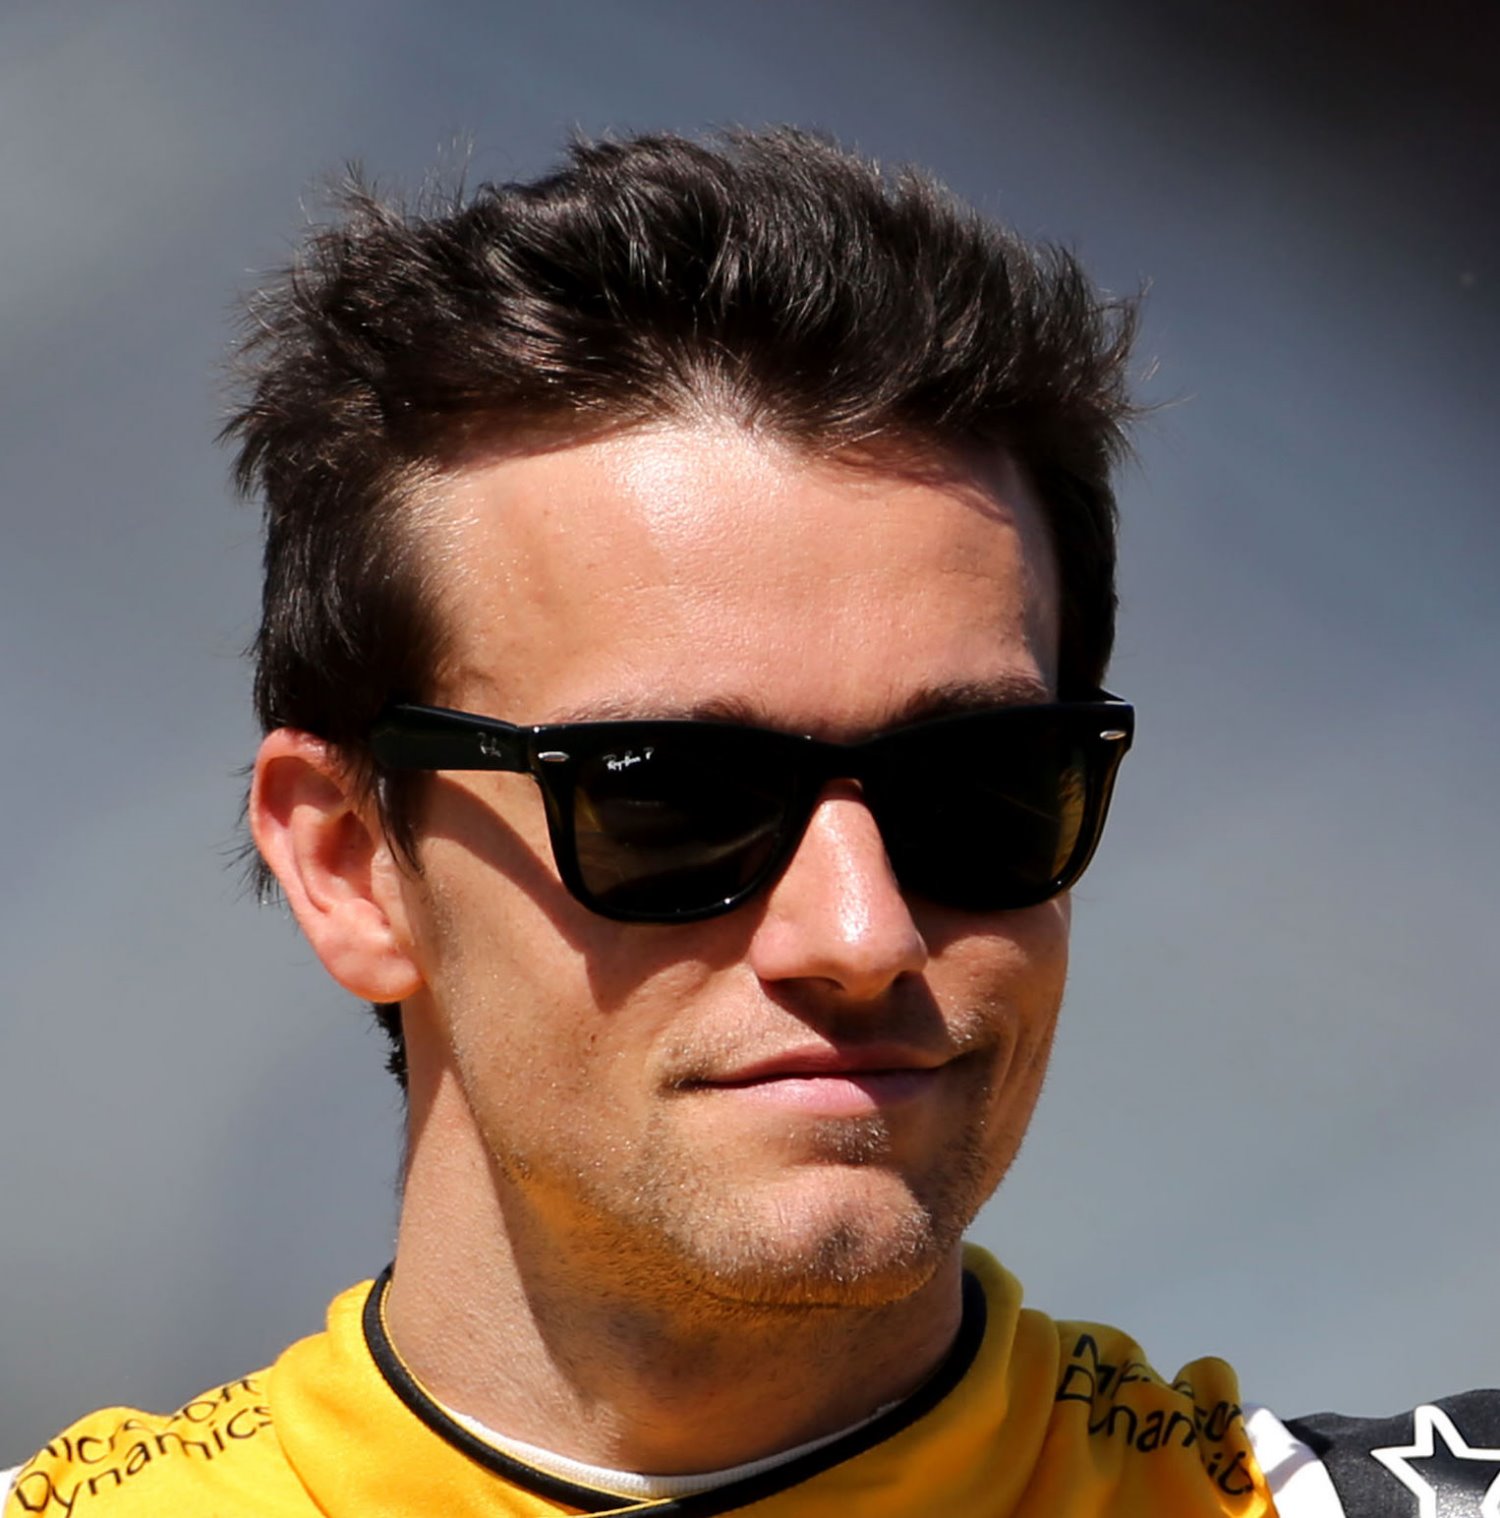 Rookie Palmer beat the more experienced and highly overrated Magnussen his very first time out